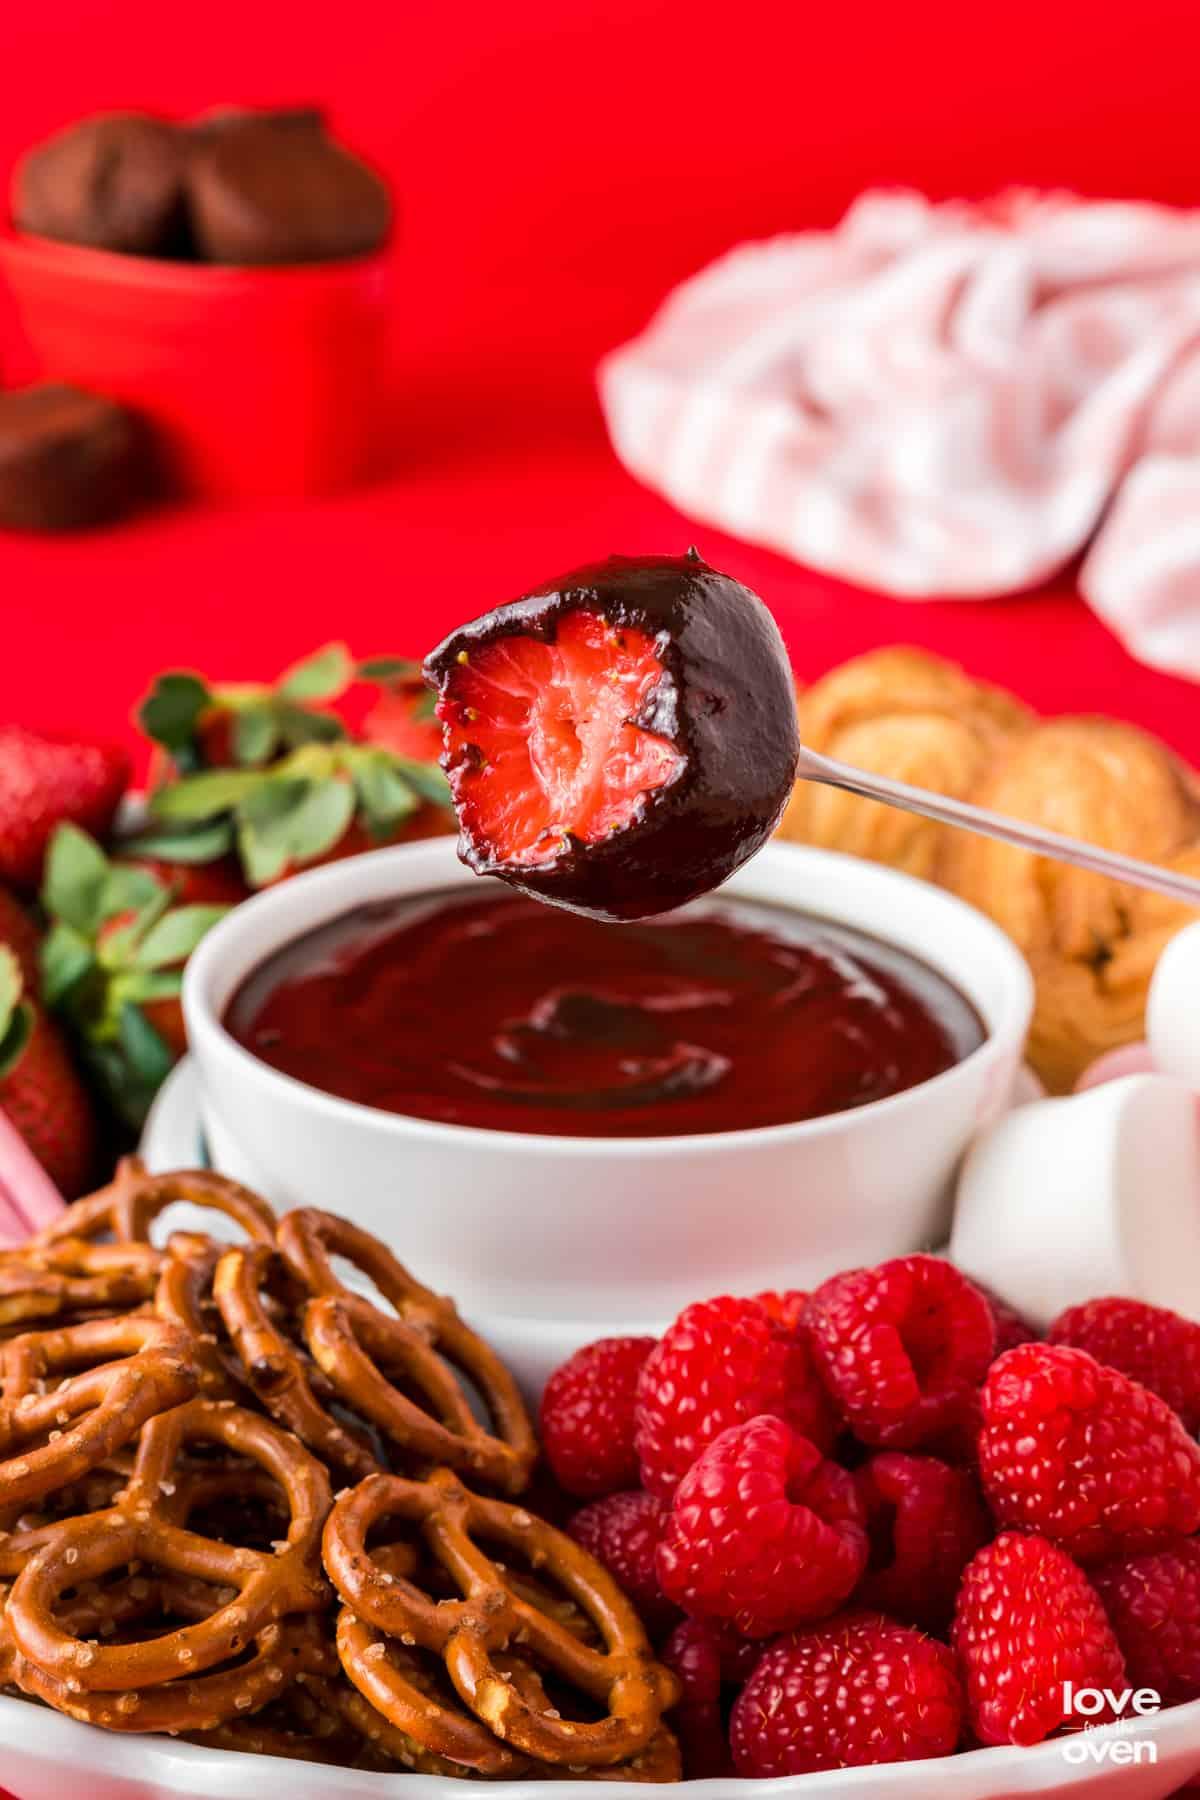 Easy Chocolate Fondue Recipe (Only 5 ingredients!) - Olivia's Cuisine